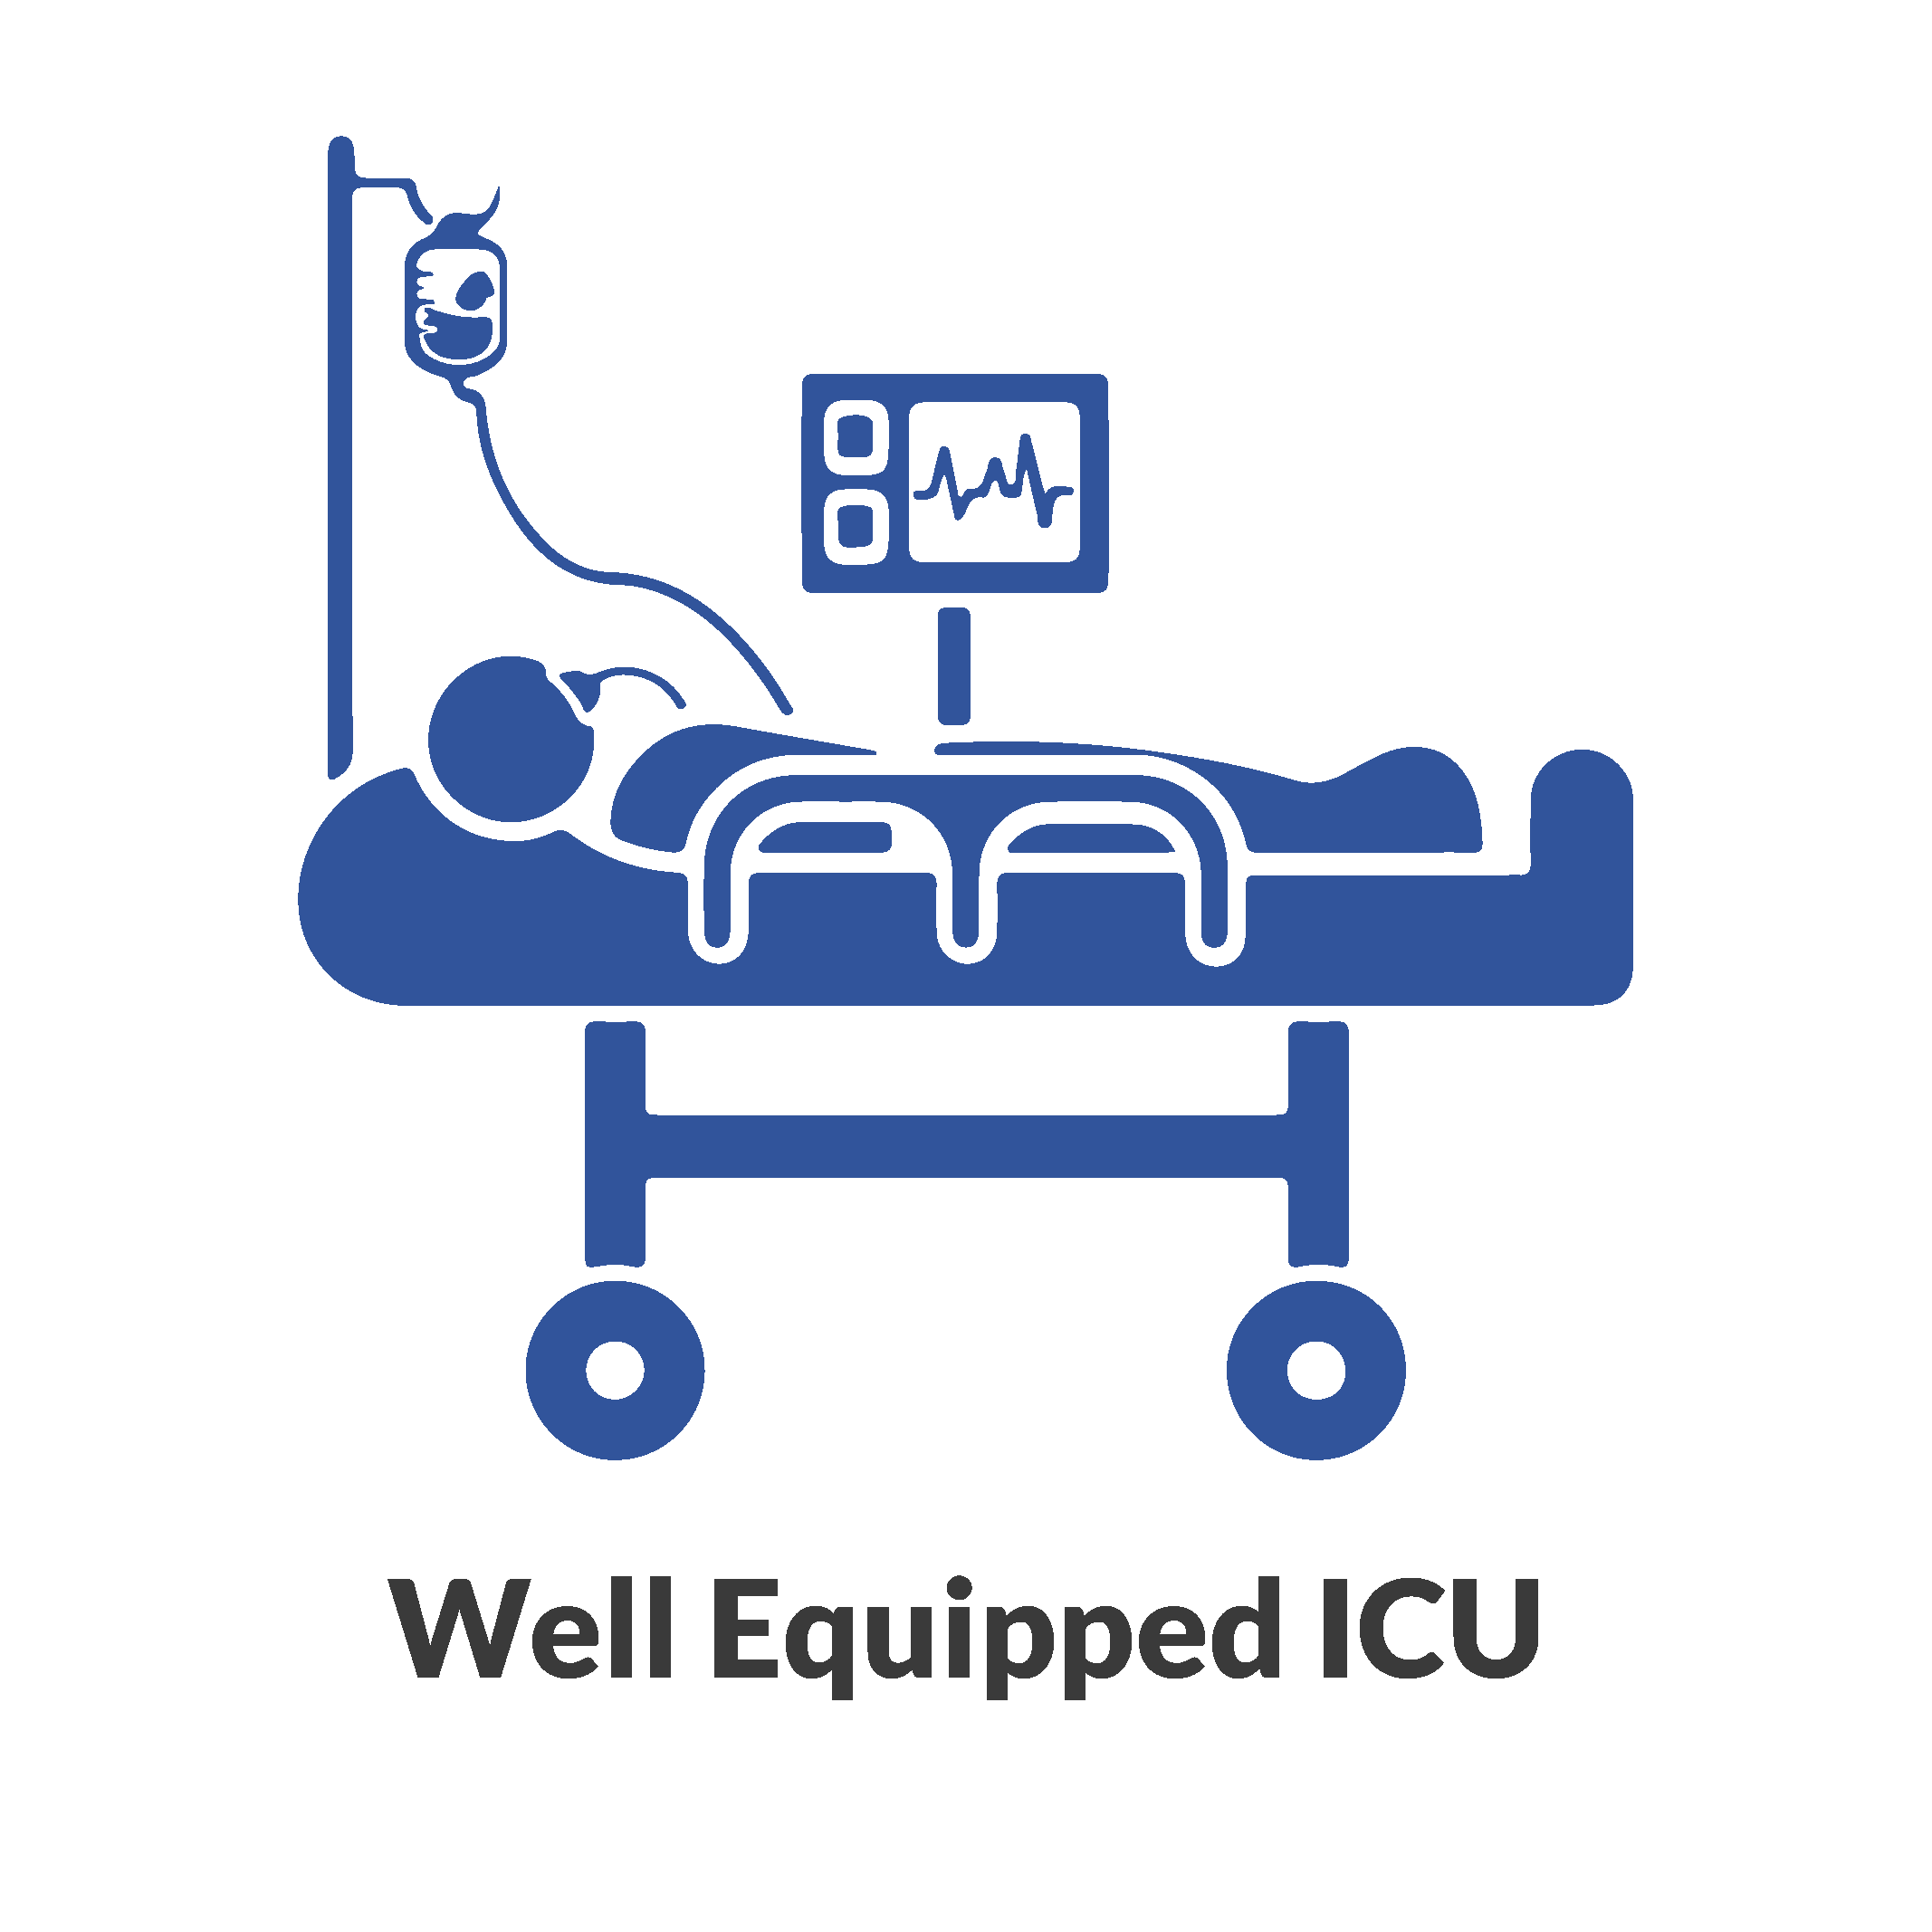 Well Equipped ICU